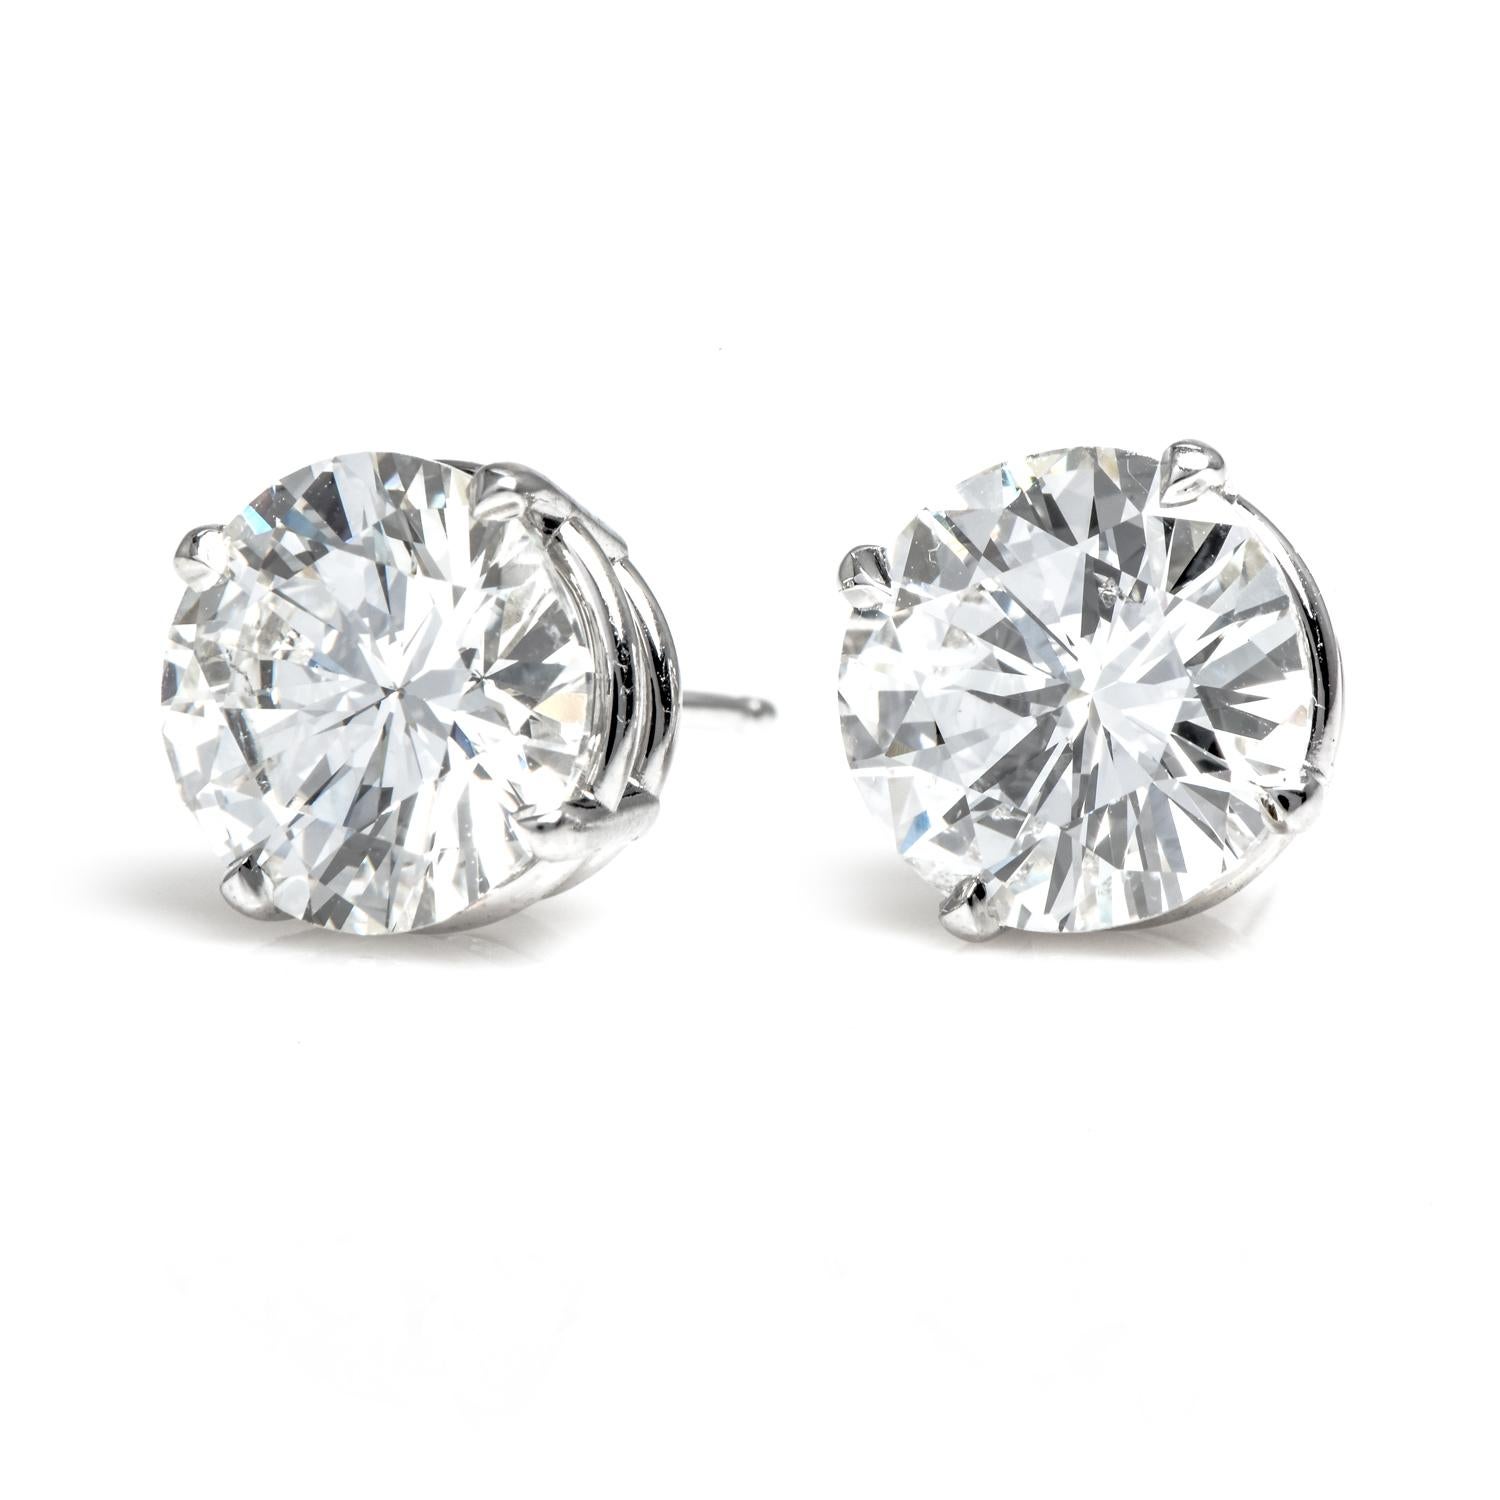 These must-have earrings are crafted in 18K white gold set with  2 round faceted Brilliant-cut diamonds weighing approx  4.03 carats in total. They are GIA Certified, one 2.00 carats I color, SI1, and 2.03 carats H color SI2 Prong Set in 18k white